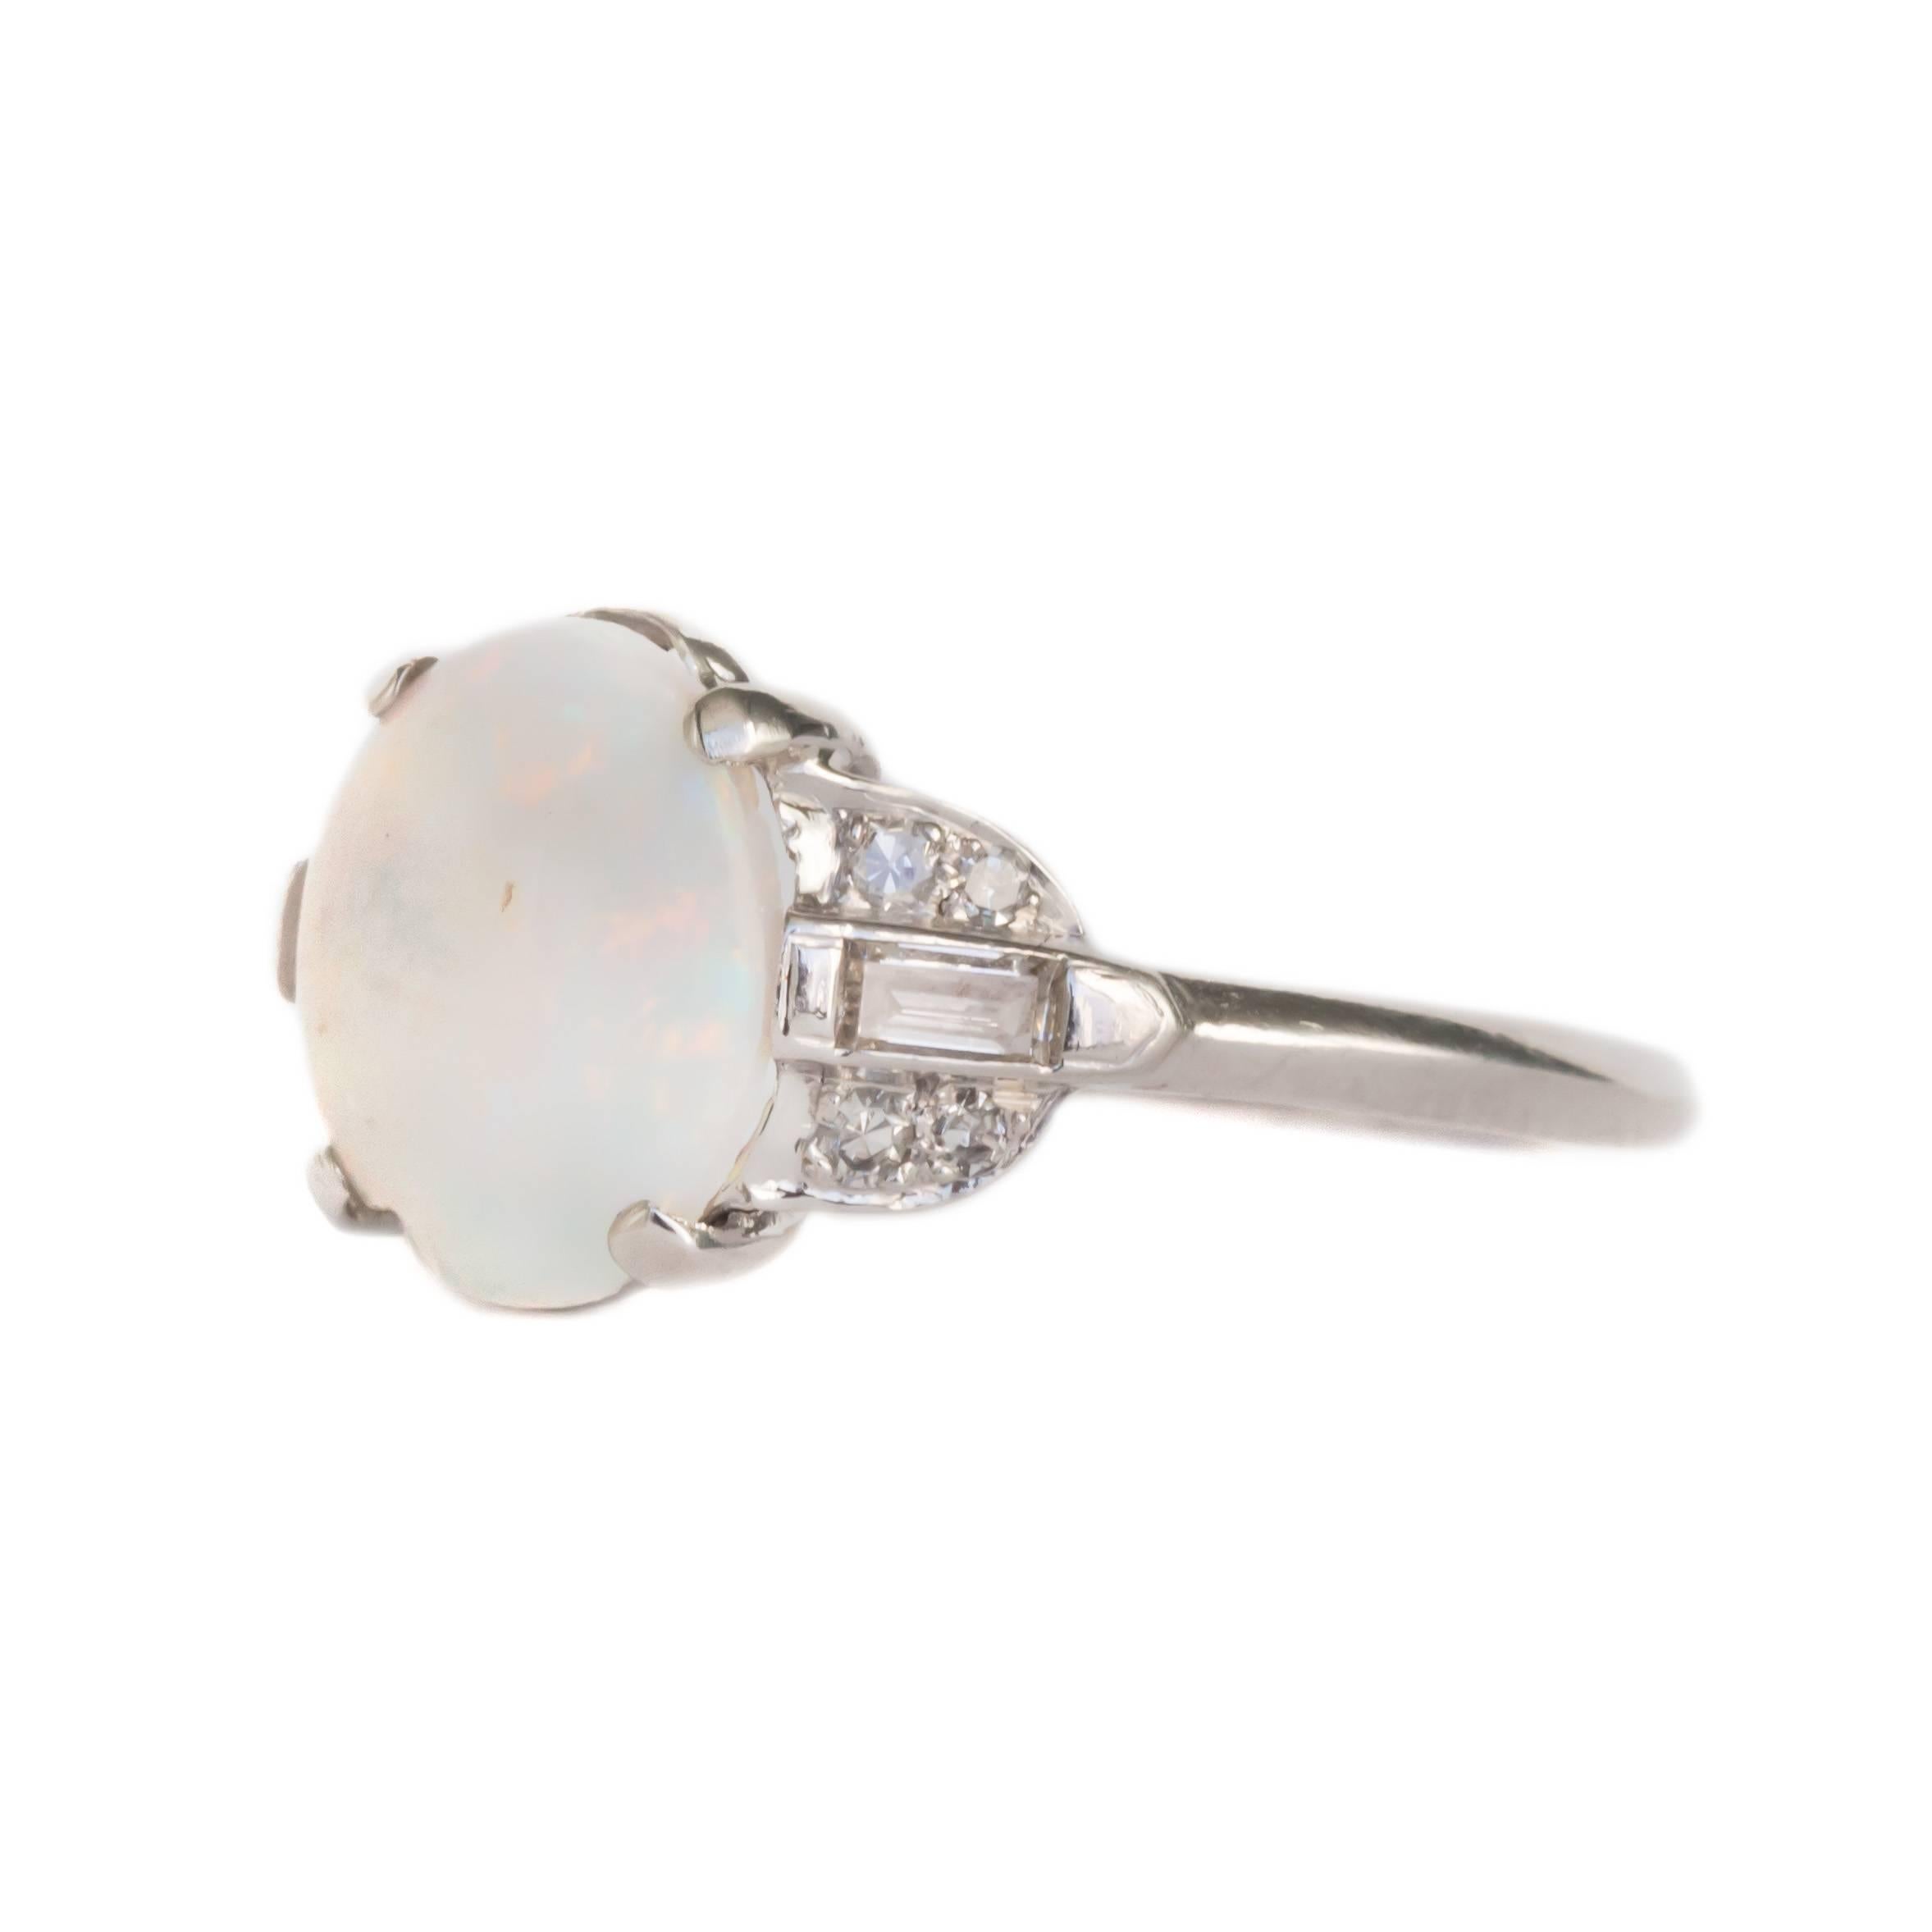 Item Details: 
Ring Size: Approximately 5.50
Metal Type: Platinum
Weight: 2.6 grams

Color Stone Details: 
Type: Opal
Shape: Oval
Carat Weight: 1.50 carat
Color: Mixed Color Play Over White

Side Stone Details: 
Shape: Antique Single Cut and